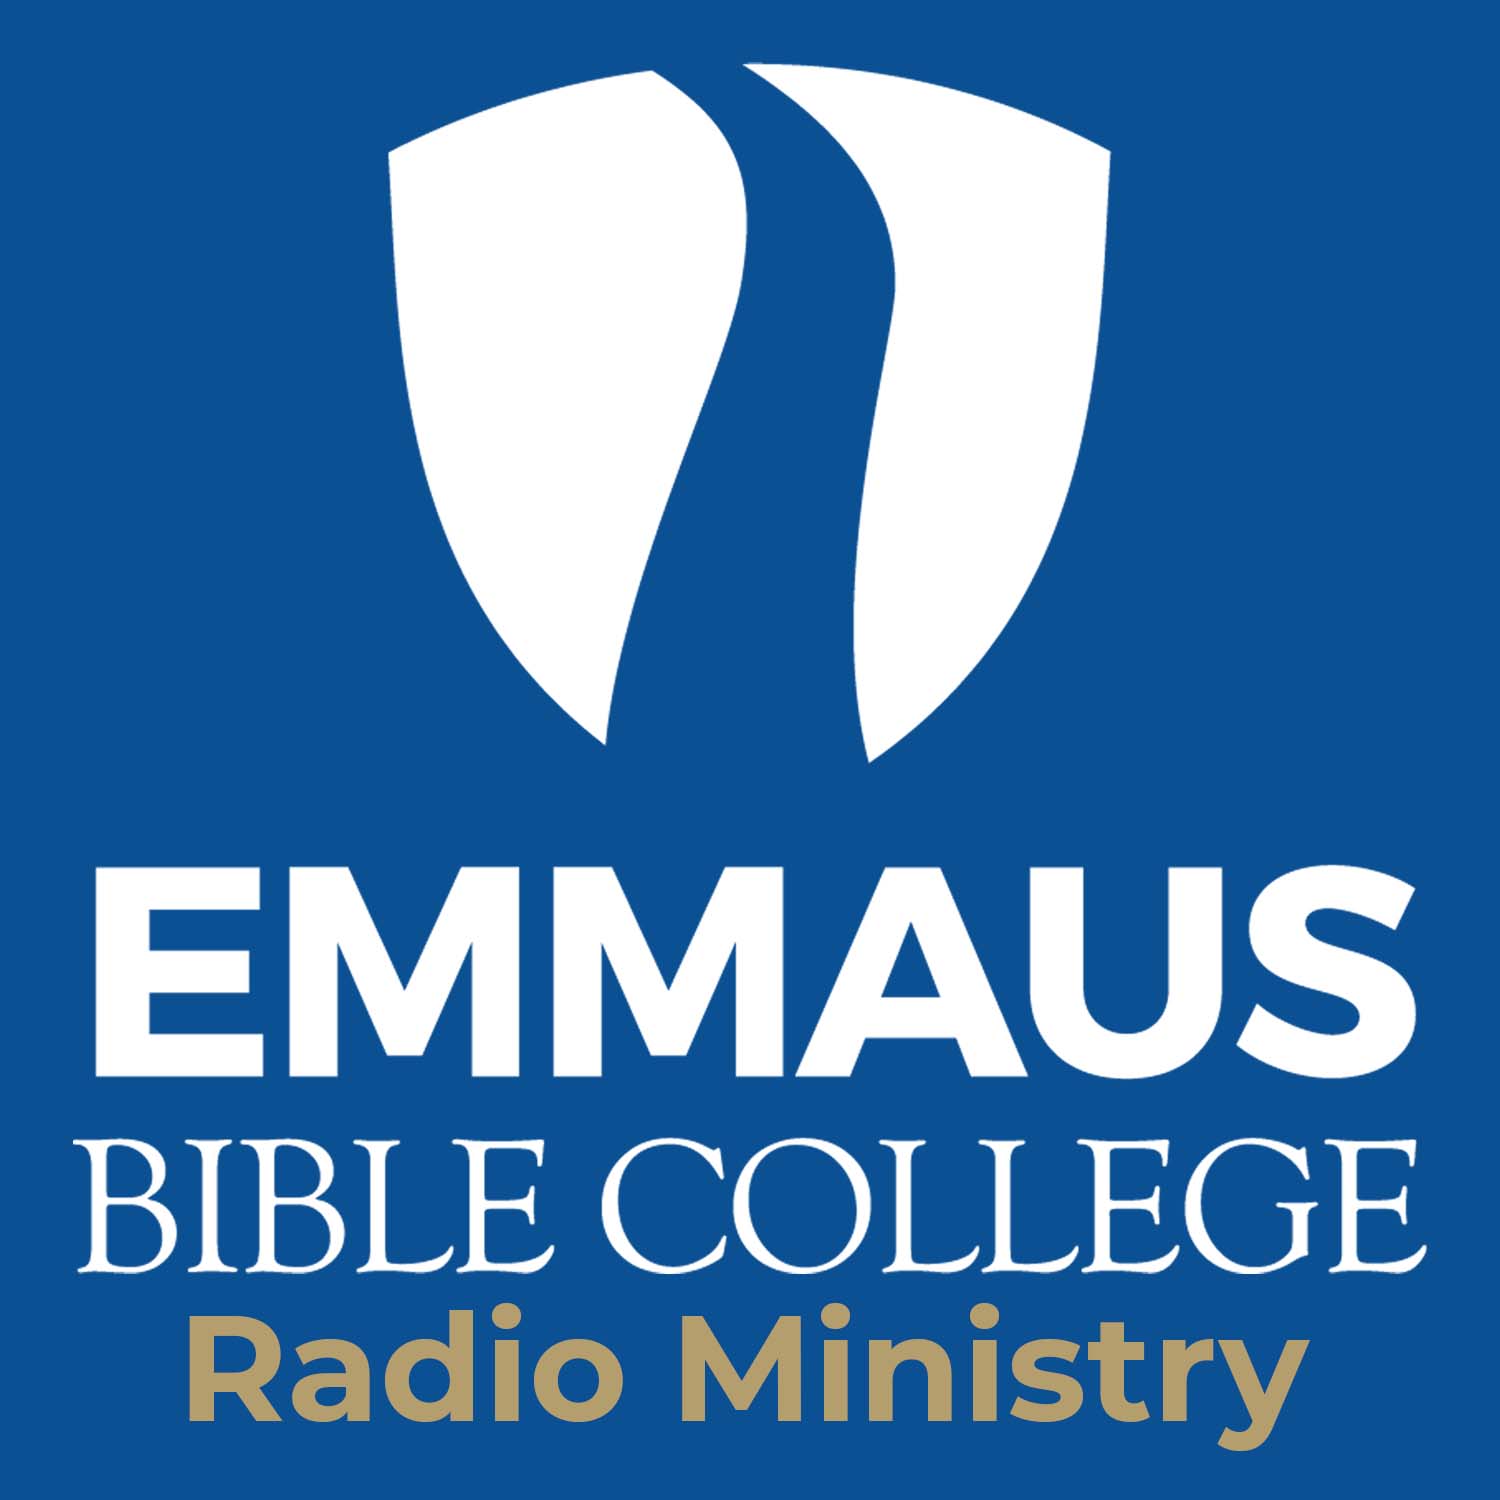 Matthew 25: 31-46 - Bruce Henning "Sheep, Goats, and Brothers" (Episode 60)